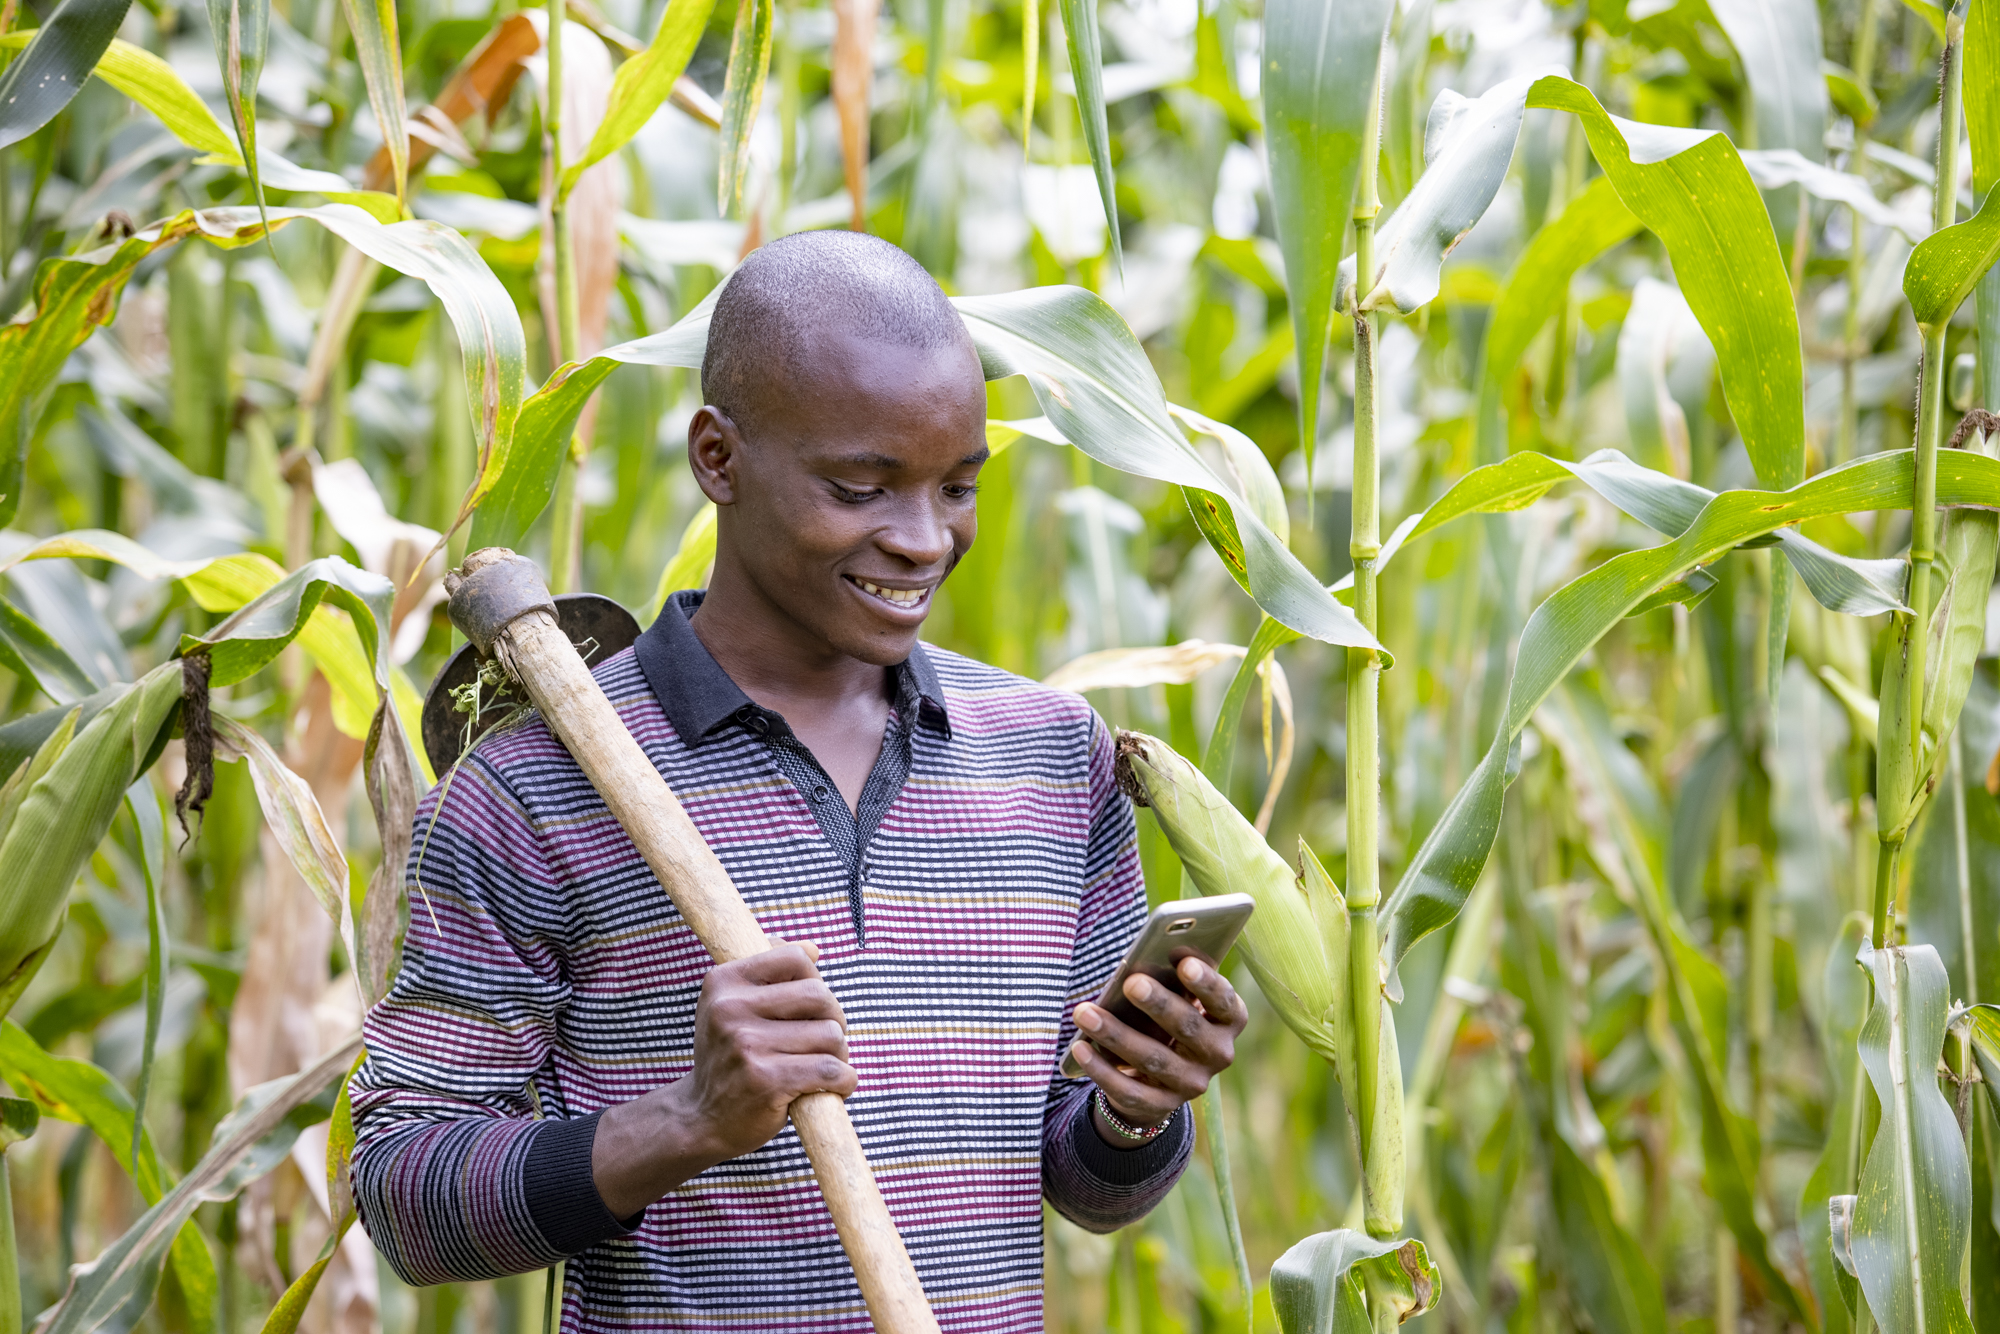 Successful Implementation of Agtech for Smallholder Farmers